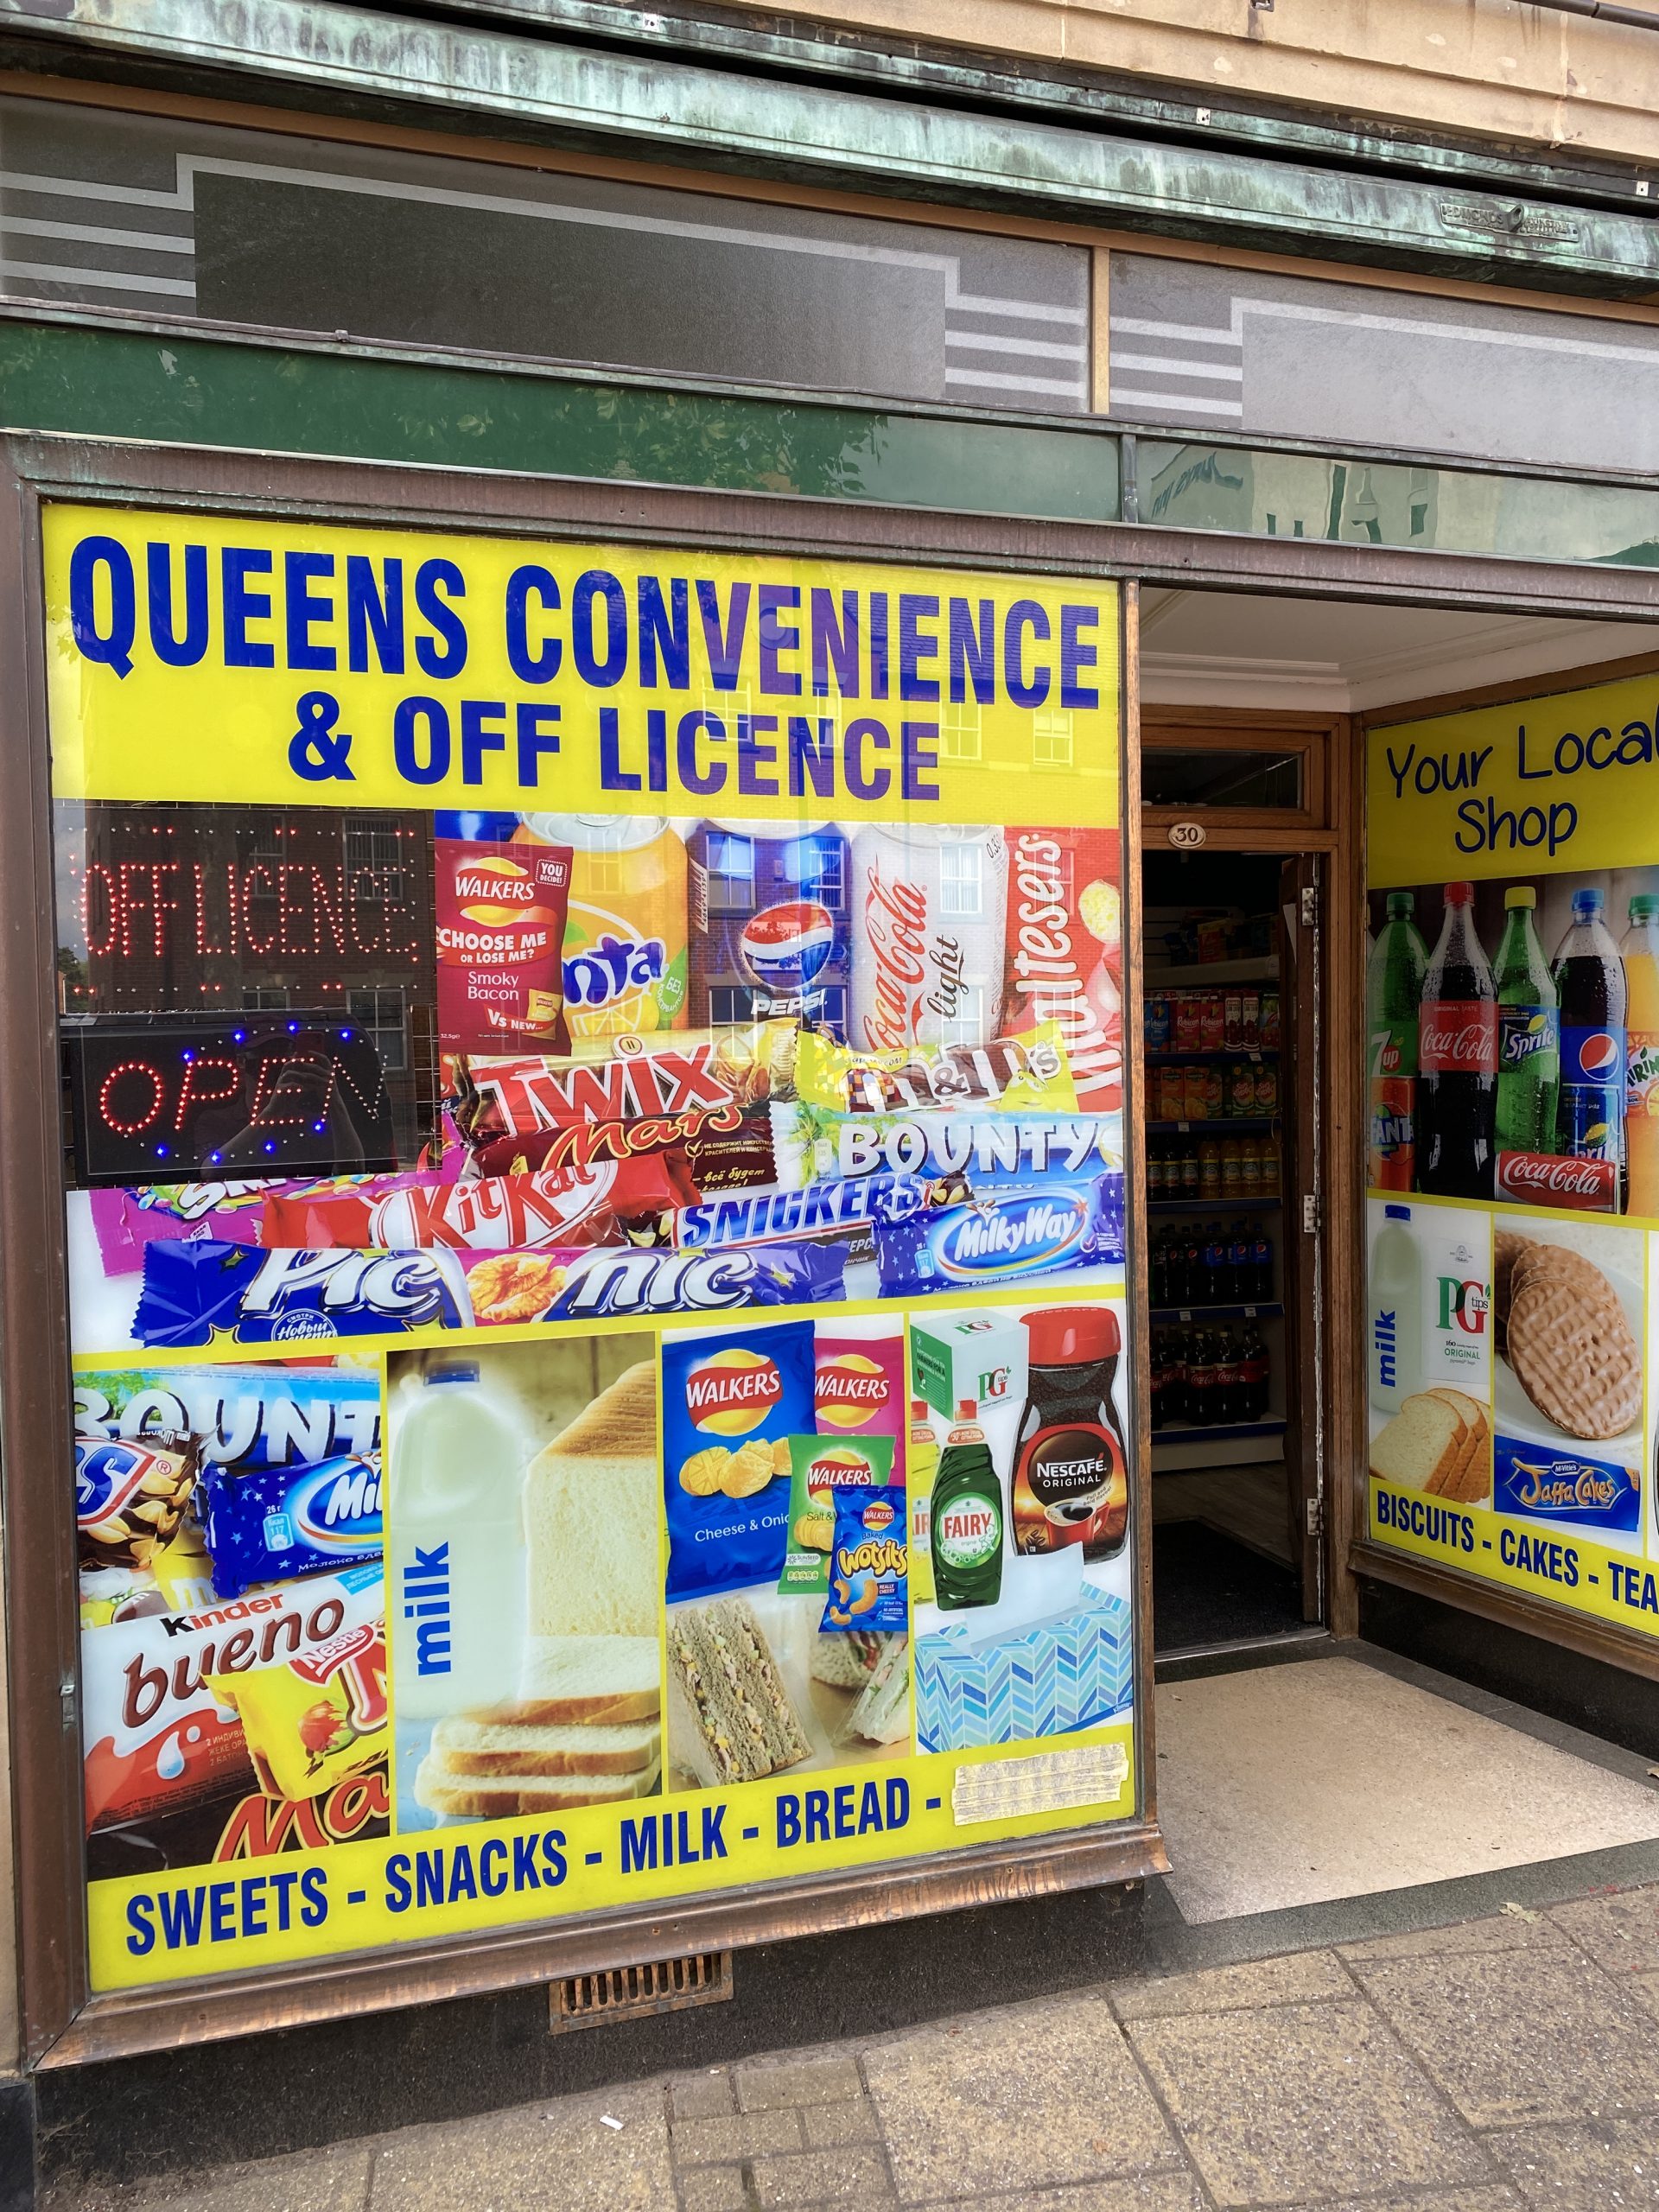 Queens Convenience and Off License